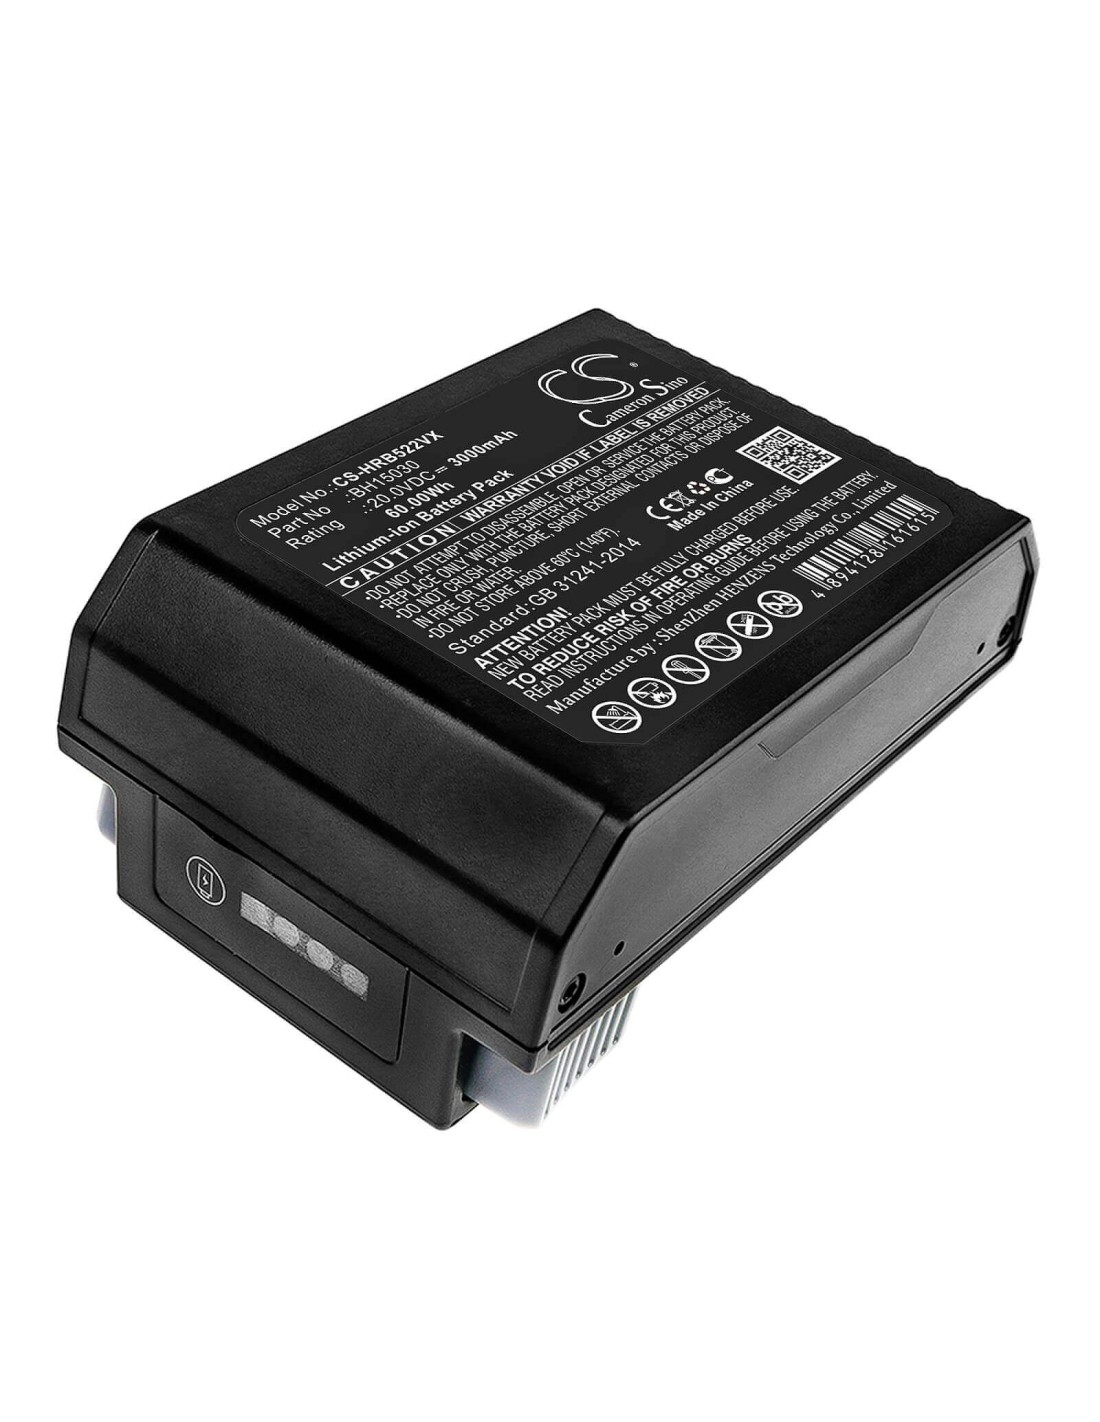 Hoover, Bh12001, Bh53310, Bh53350 replacement battery